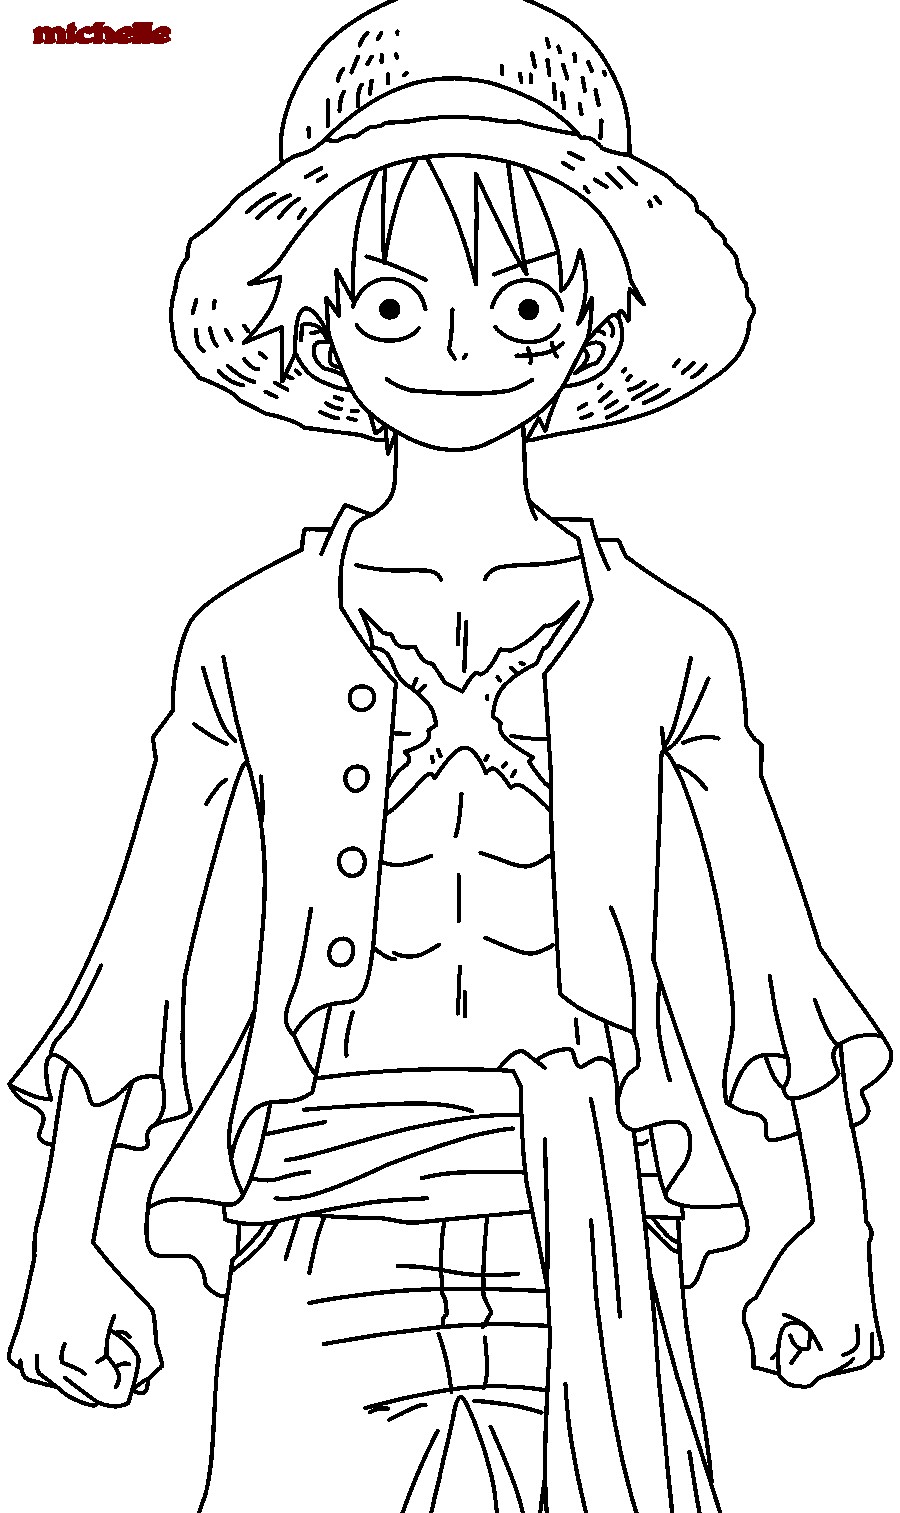 One Piece Luffy After 2 Years Coloring Page